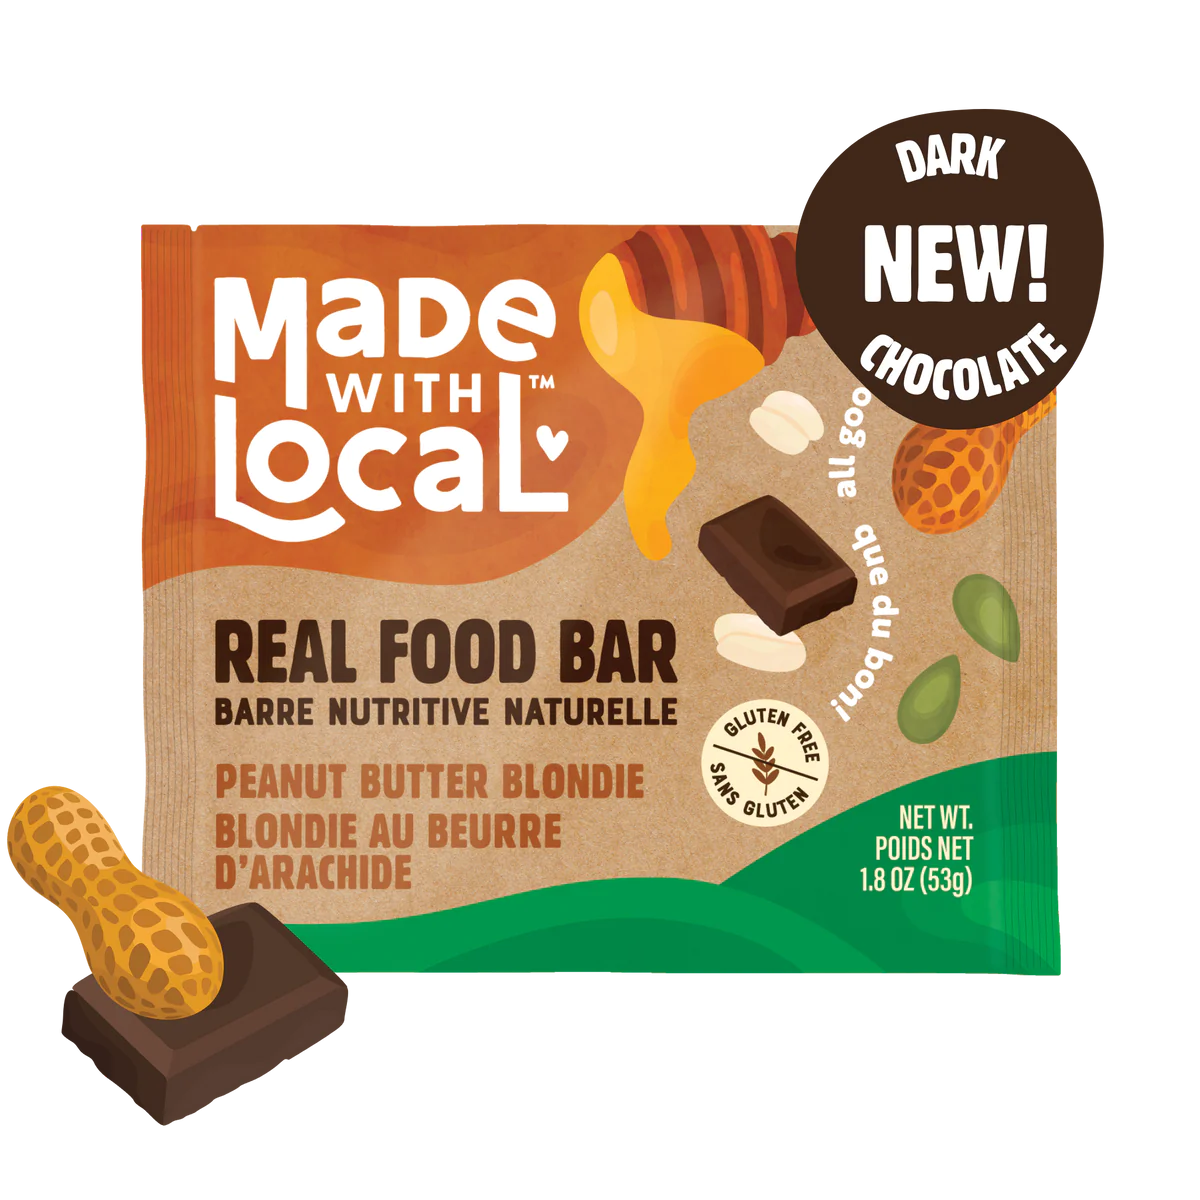 Peanut Butter Blondie- Real Food Bar by Made with Local, 53g